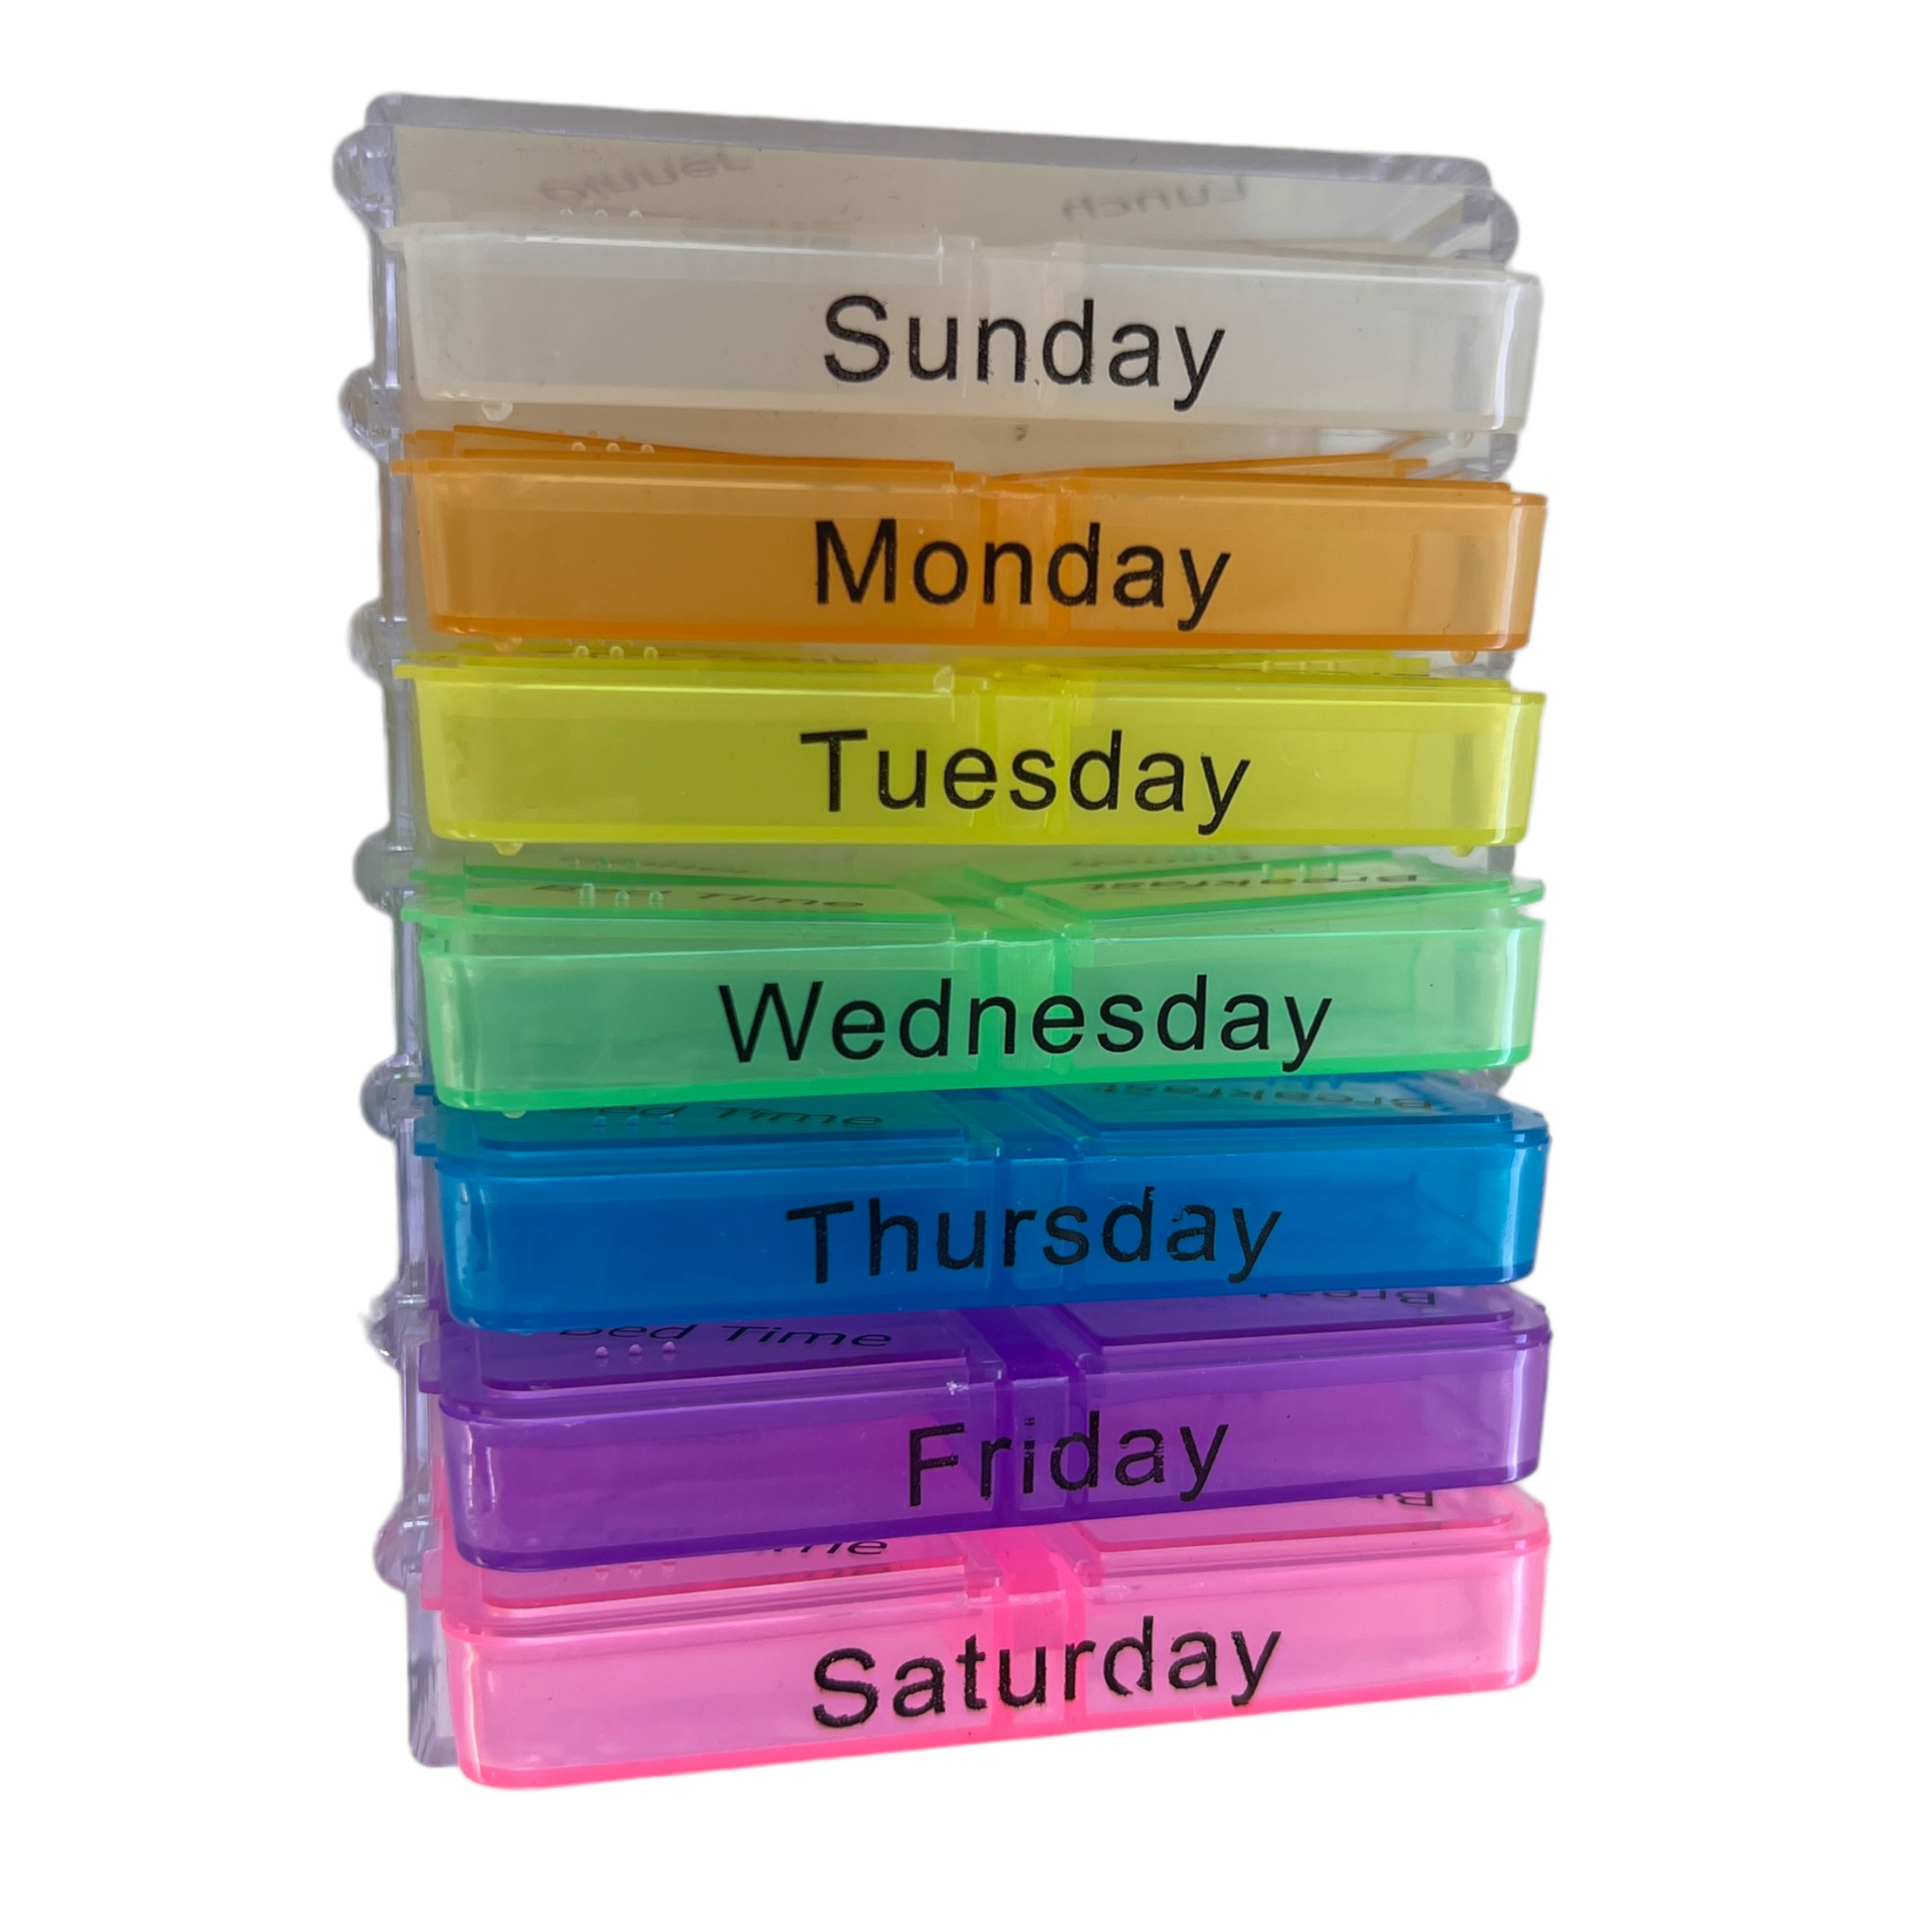 7 Day Pill Box — 4 Doses Daily - COMPACT  SPIRIT SPARKPLUGS   